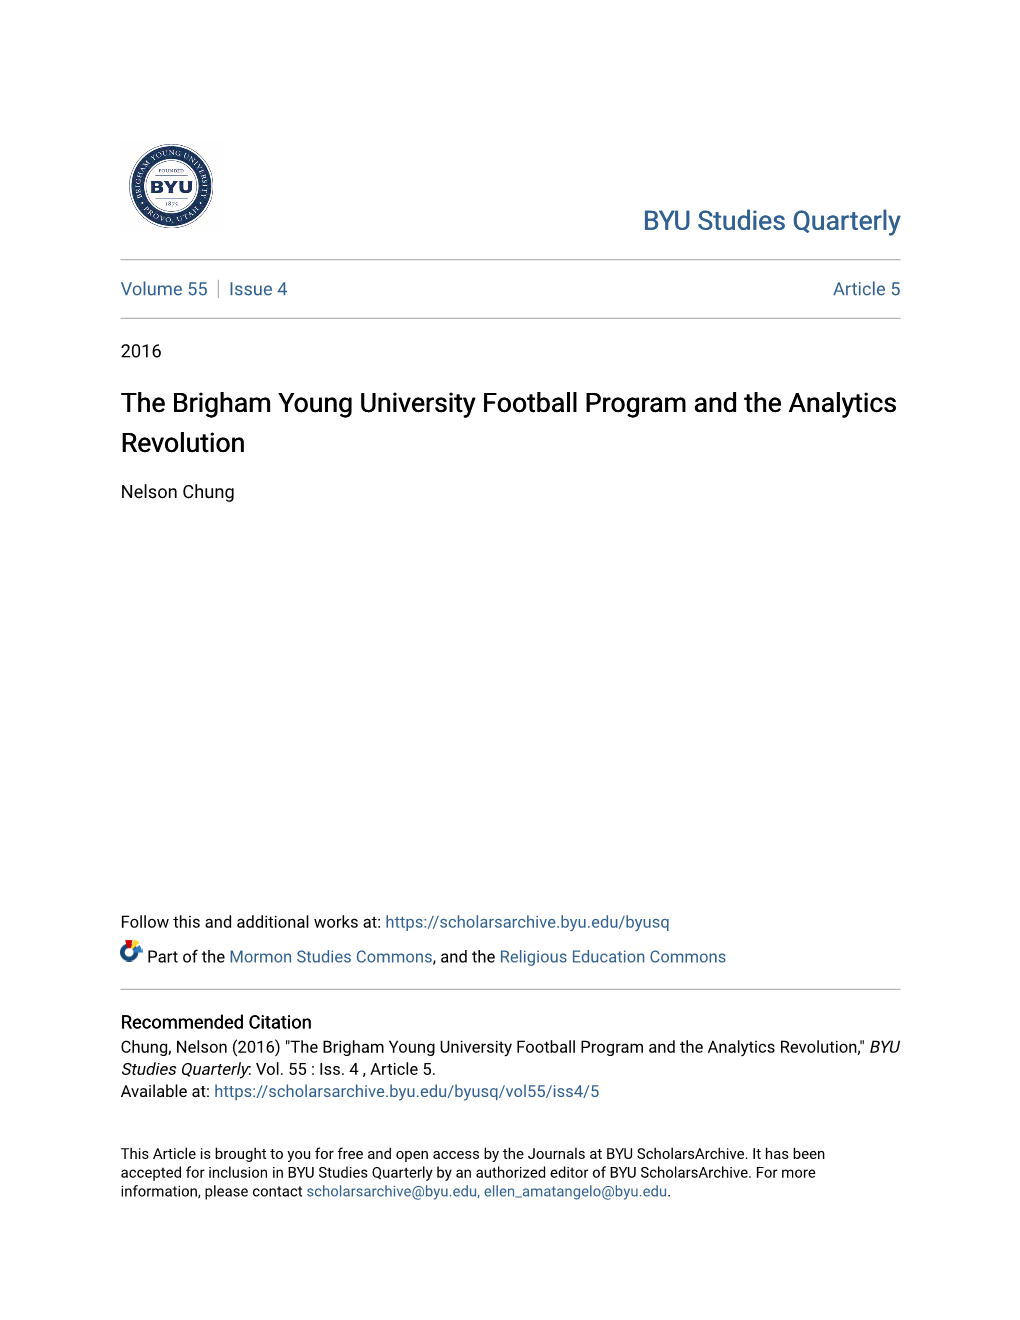 The Brigham Young University Football Program and the Analytics Revolution